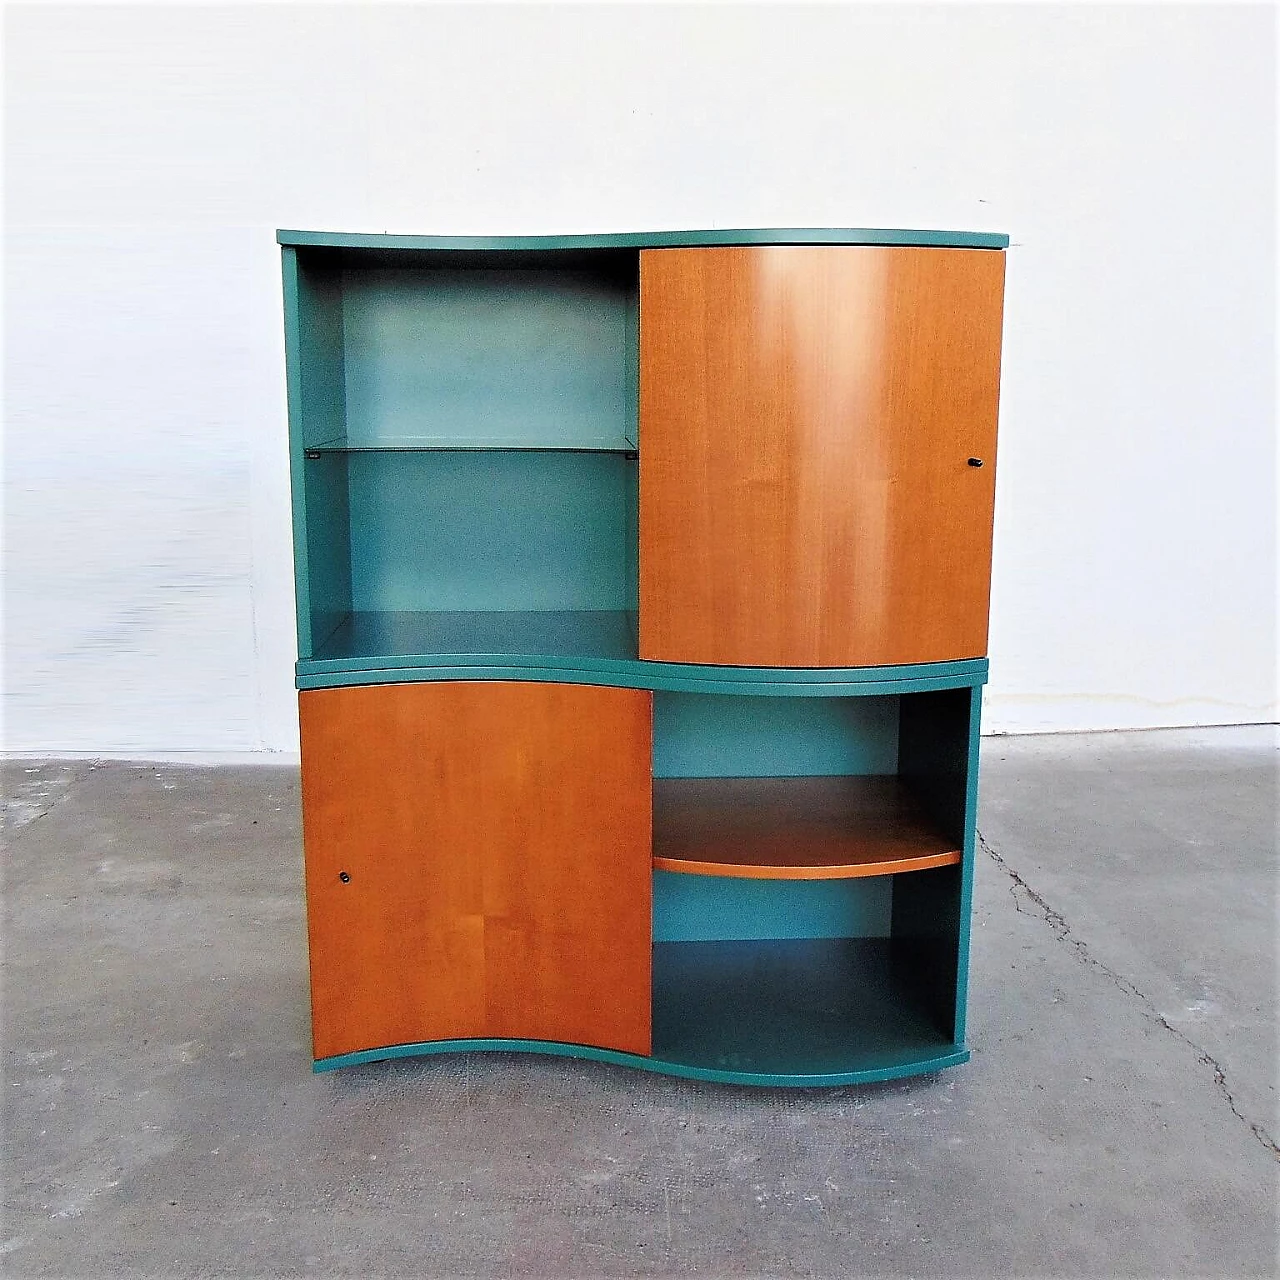 Sideboard Green Satin Lacquer, Doors in Walnut-Stained Cherry, for Roche Bobois, 1990s 1167290